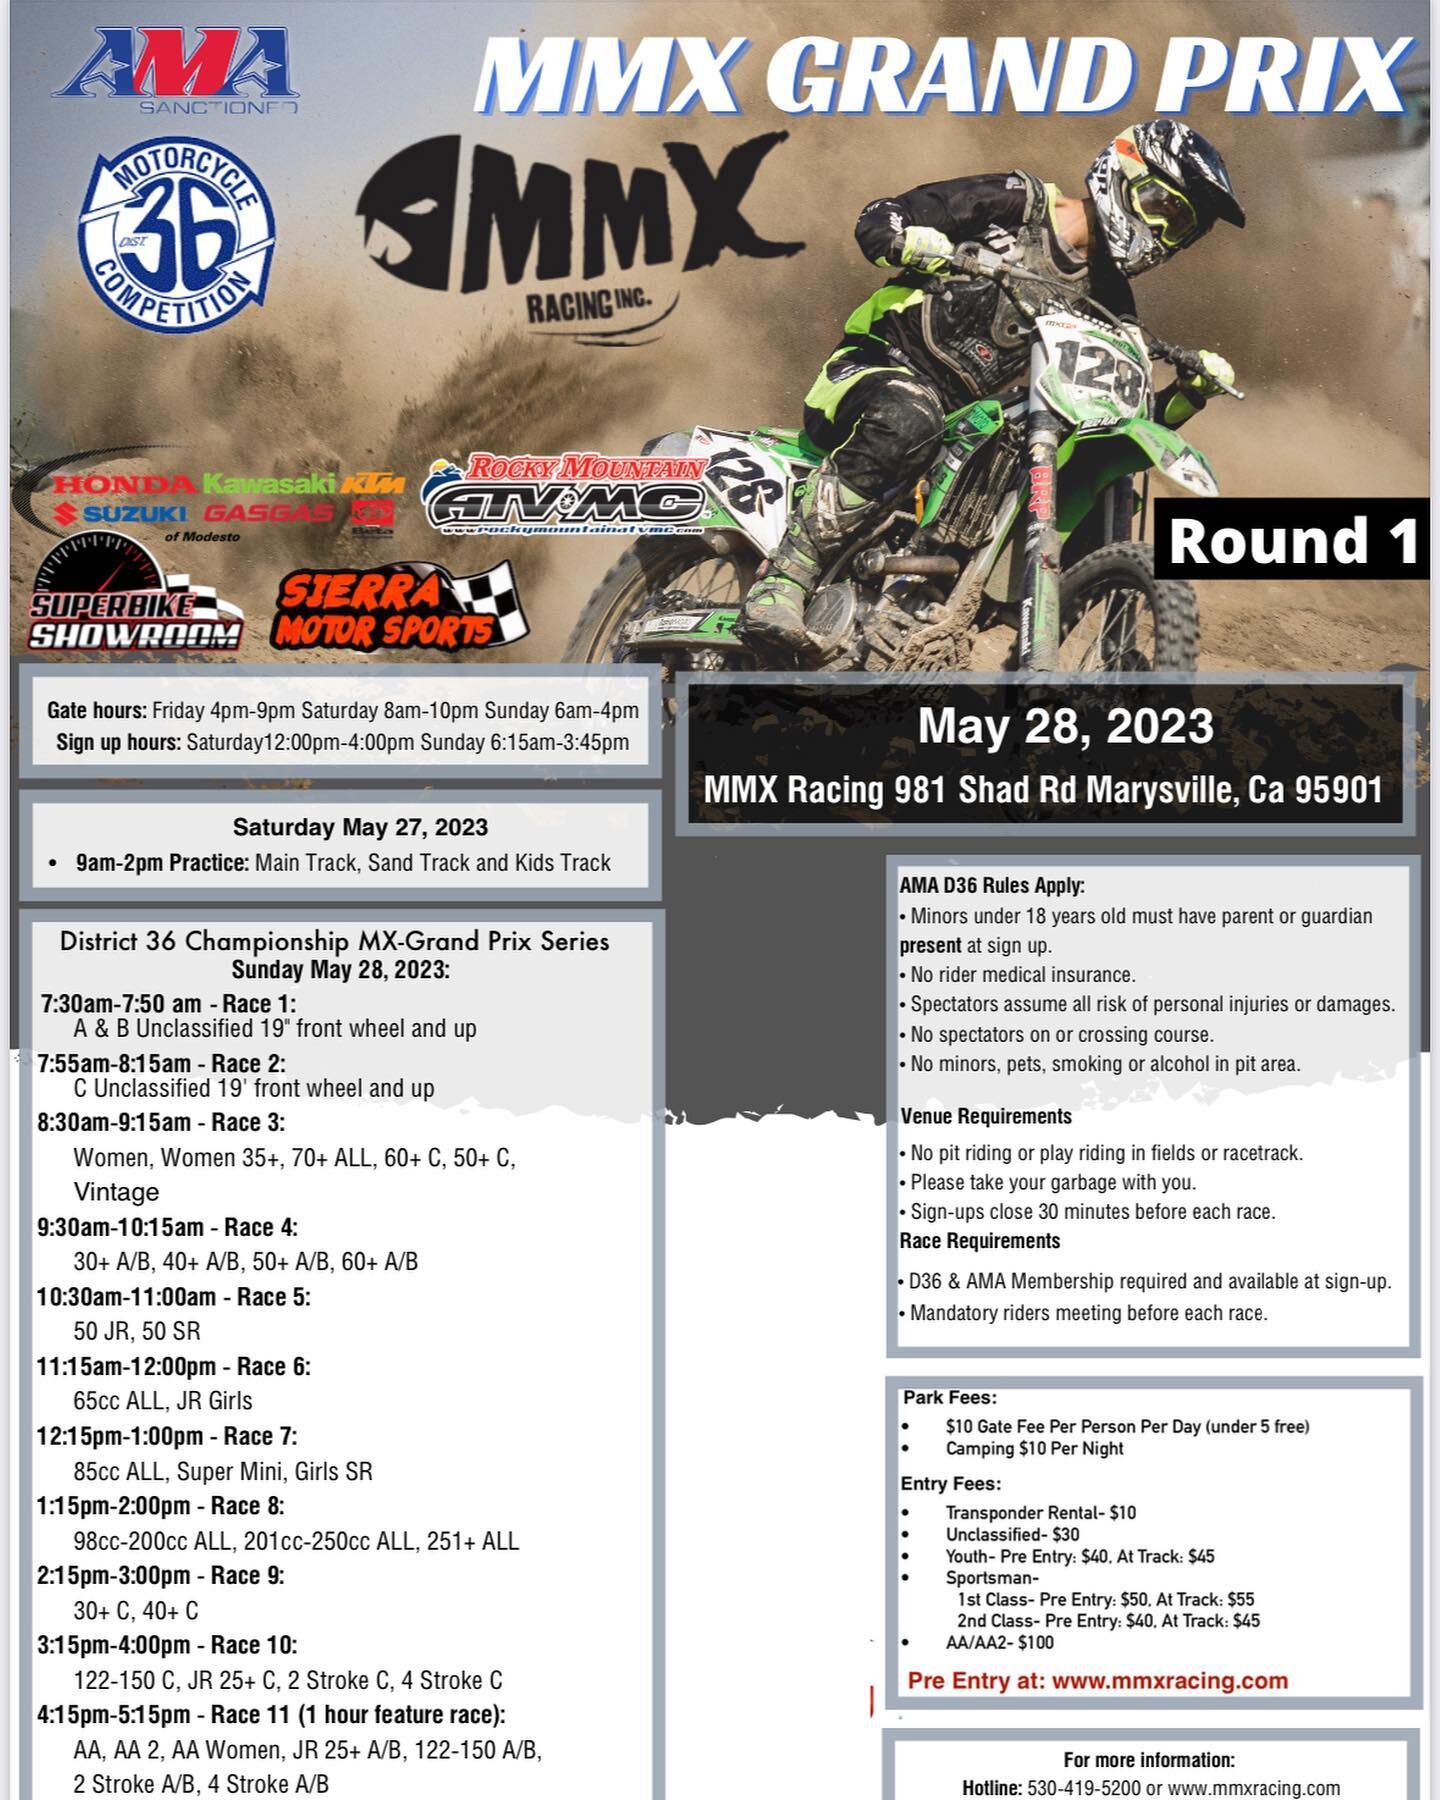 2023 AMA D36 GP Series Round 1
Keep your eyes open pre registration will open soon @ mmxracing.com 
@ama_d36 @estreetmxpark